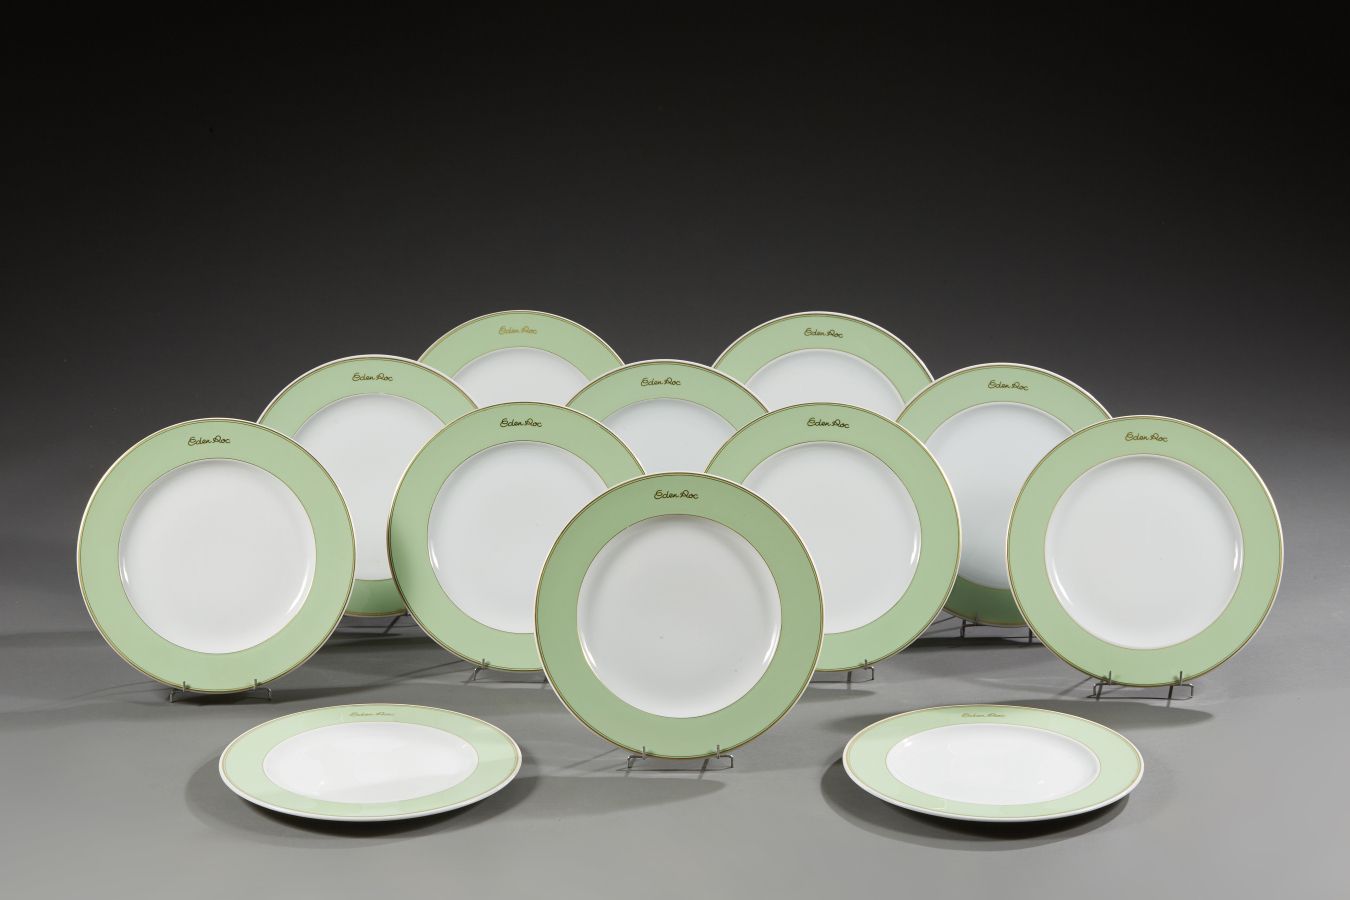 Null Hutschenreuther. Twelve round flat plates in white porcelain. The enamelled&hellip;